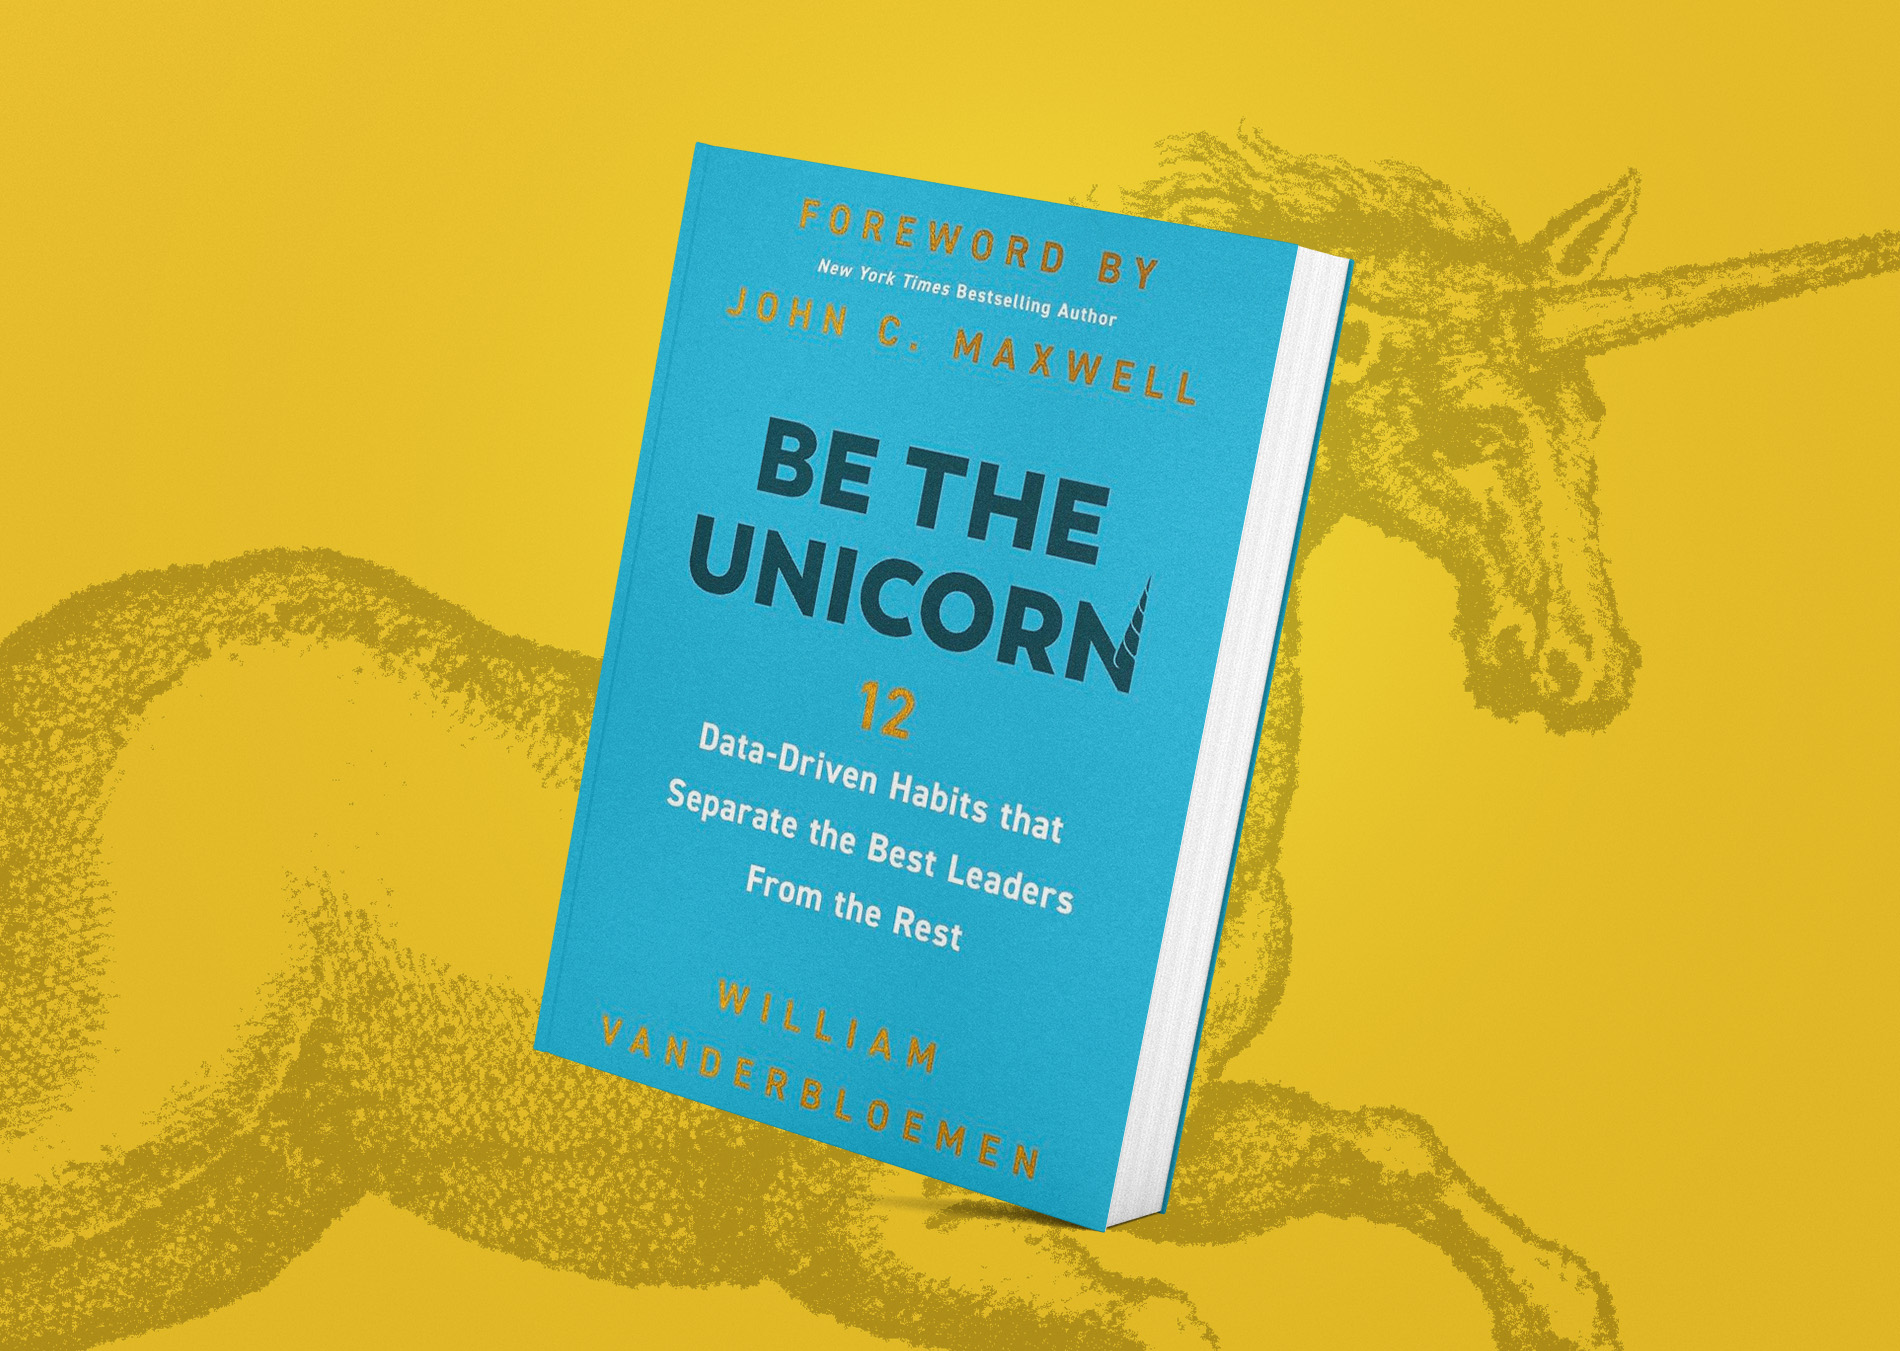 "Be the Unicorn" book cover.